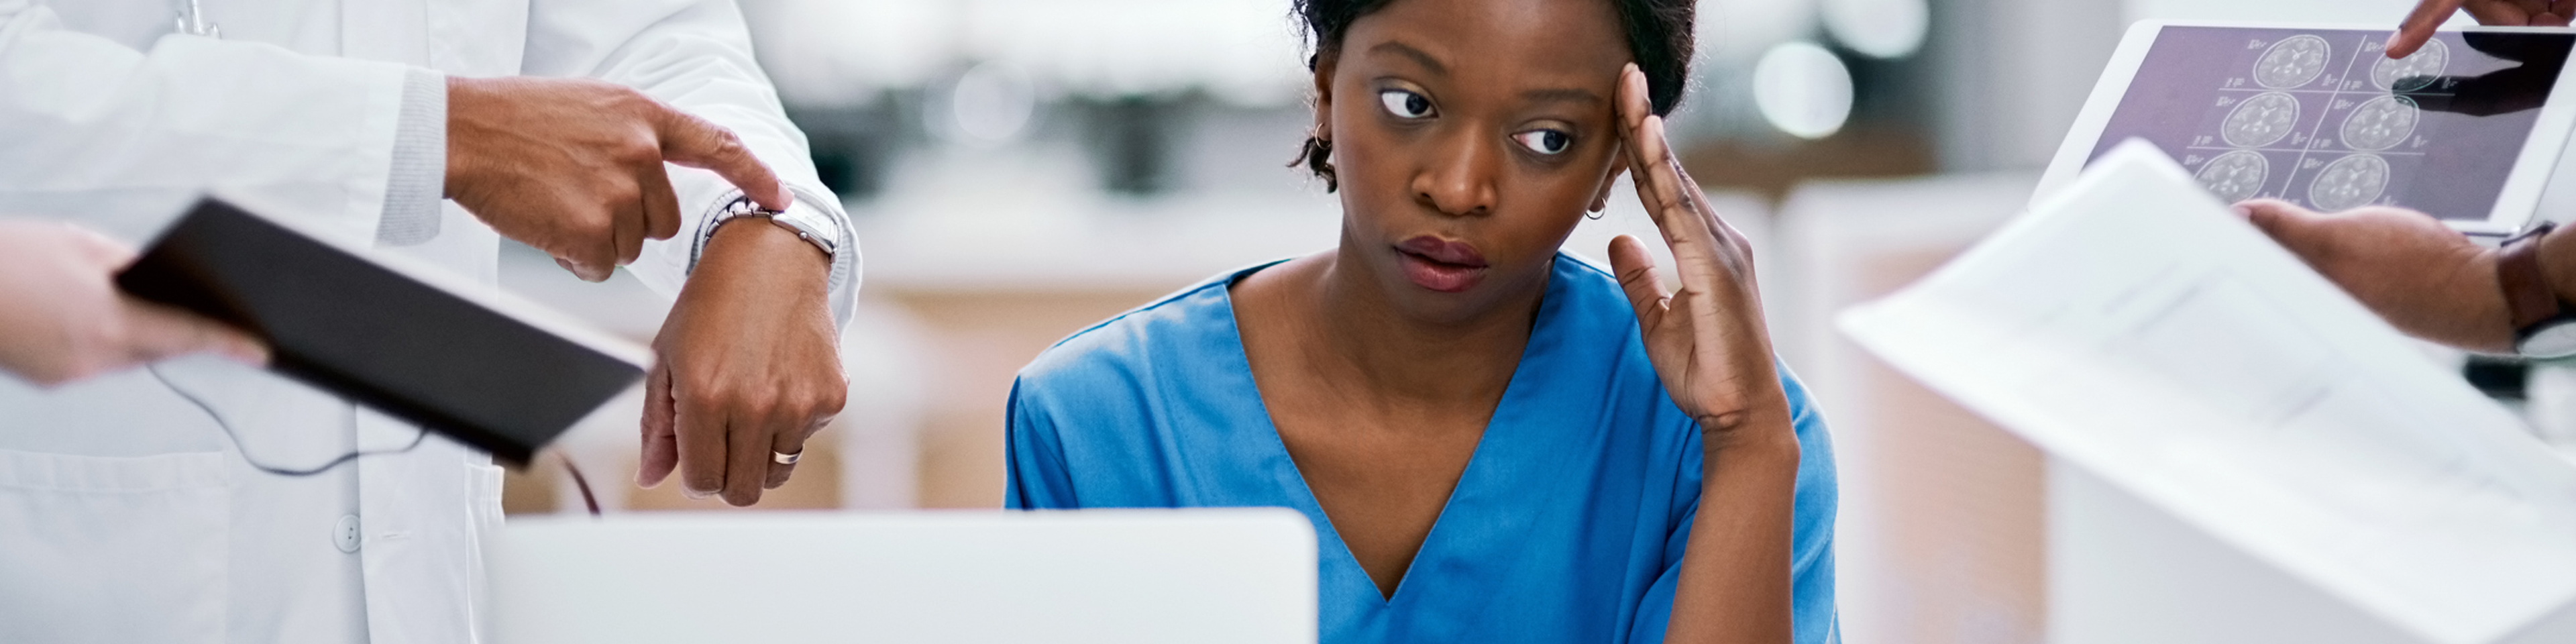 Burned out nurse sitting at table with laptop with multiple doctors around her requesting things